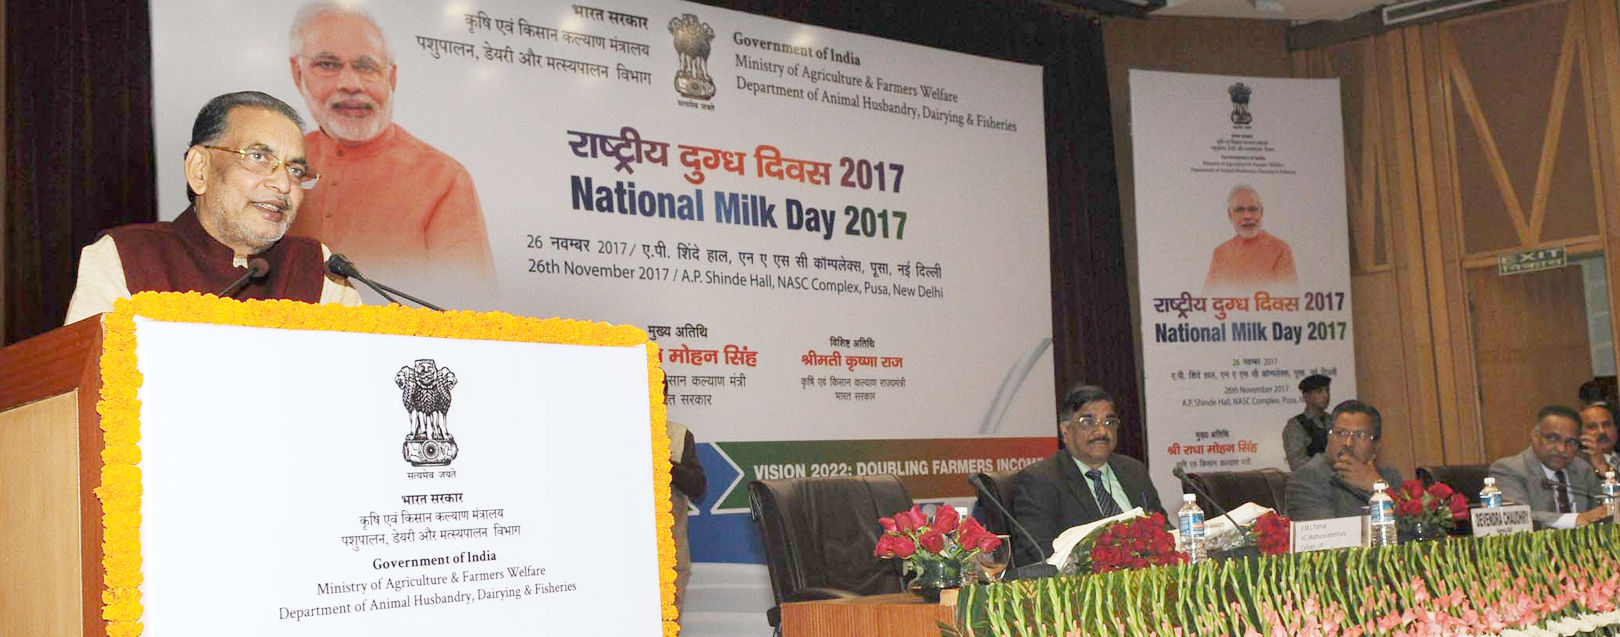 Dairy sector offers numerous opportunities for entrepreneurs globally: Radha Mohan Singh 